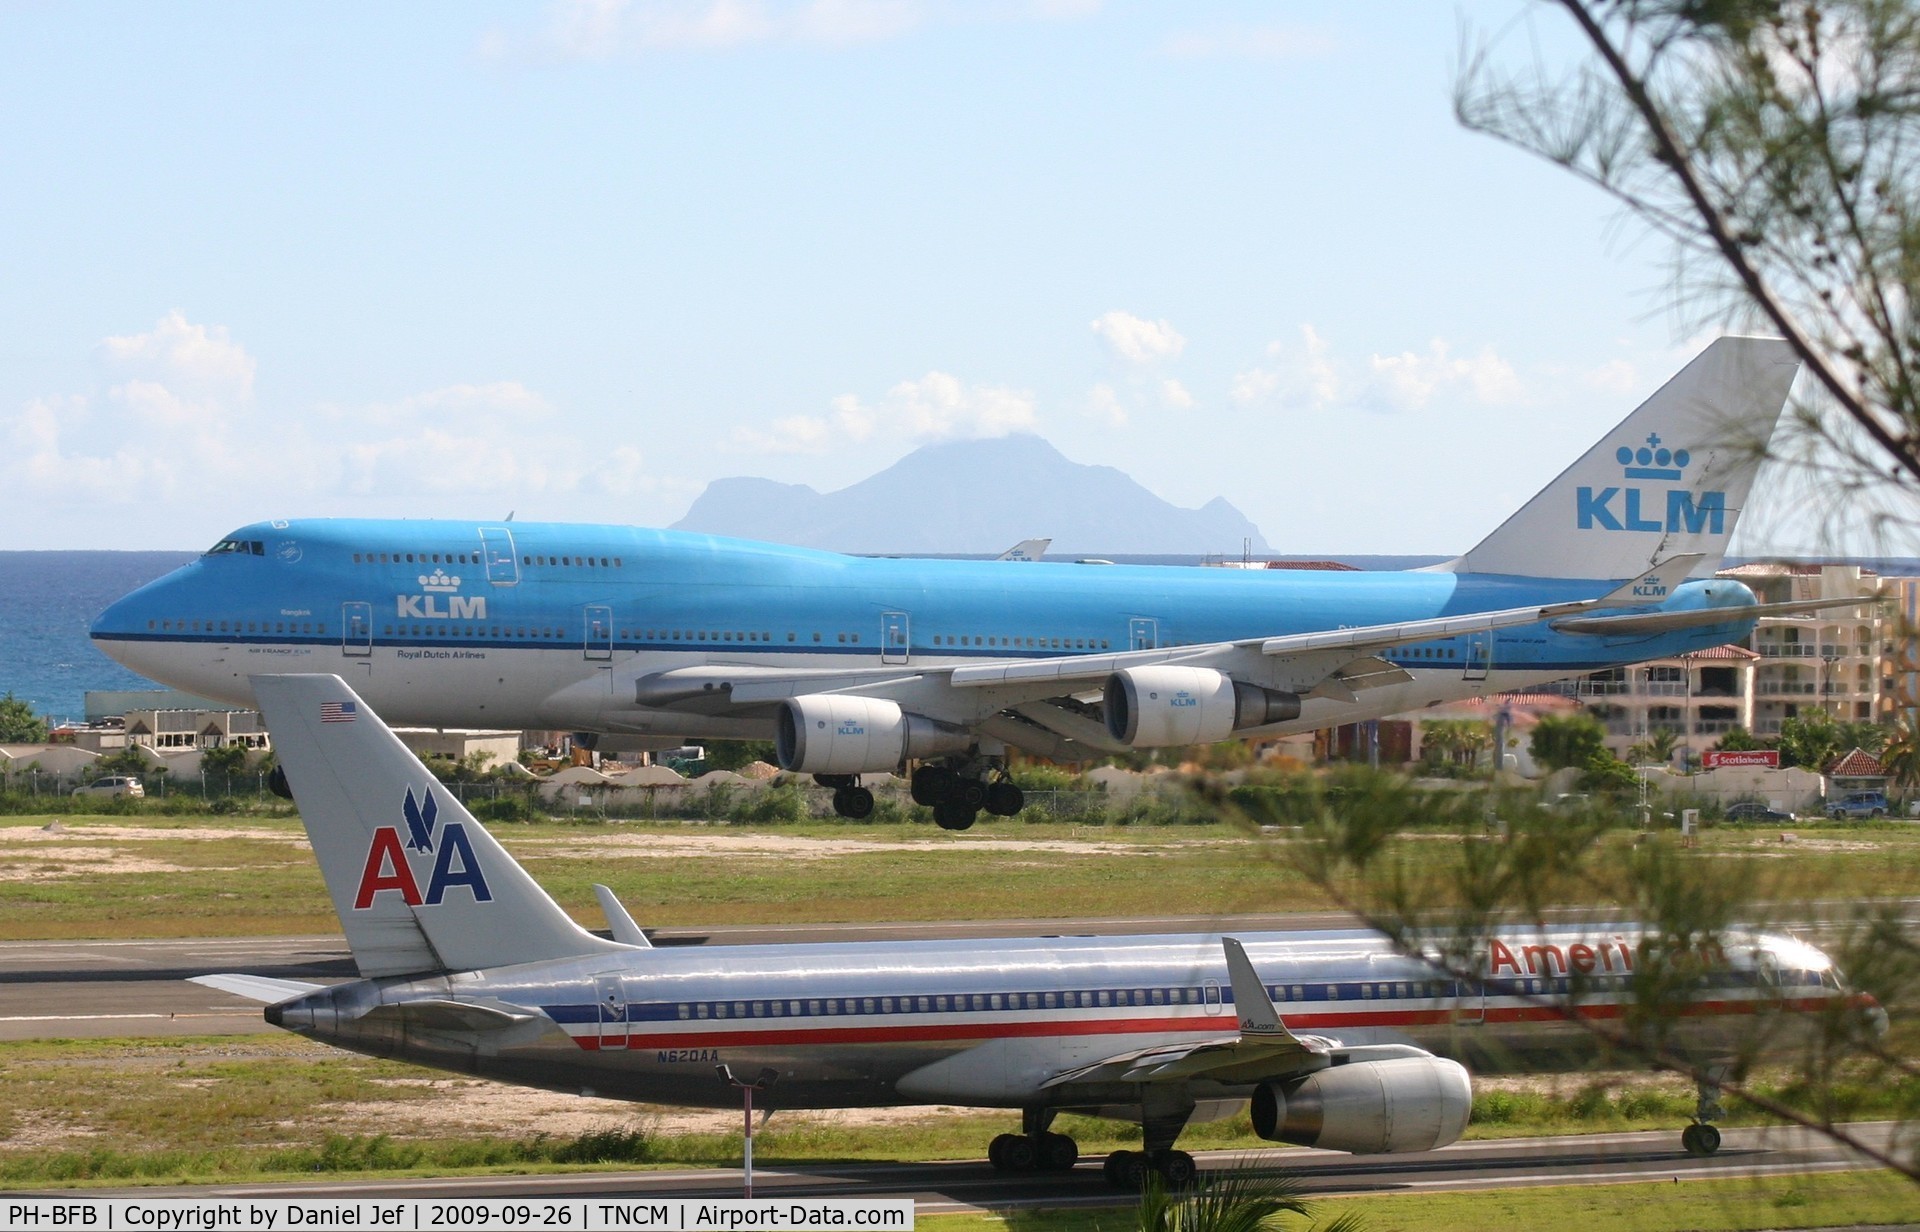 PH-BFB, 1989 Boeing 747-406 C/N 24000, a very nice shot with SABA in the back ground,